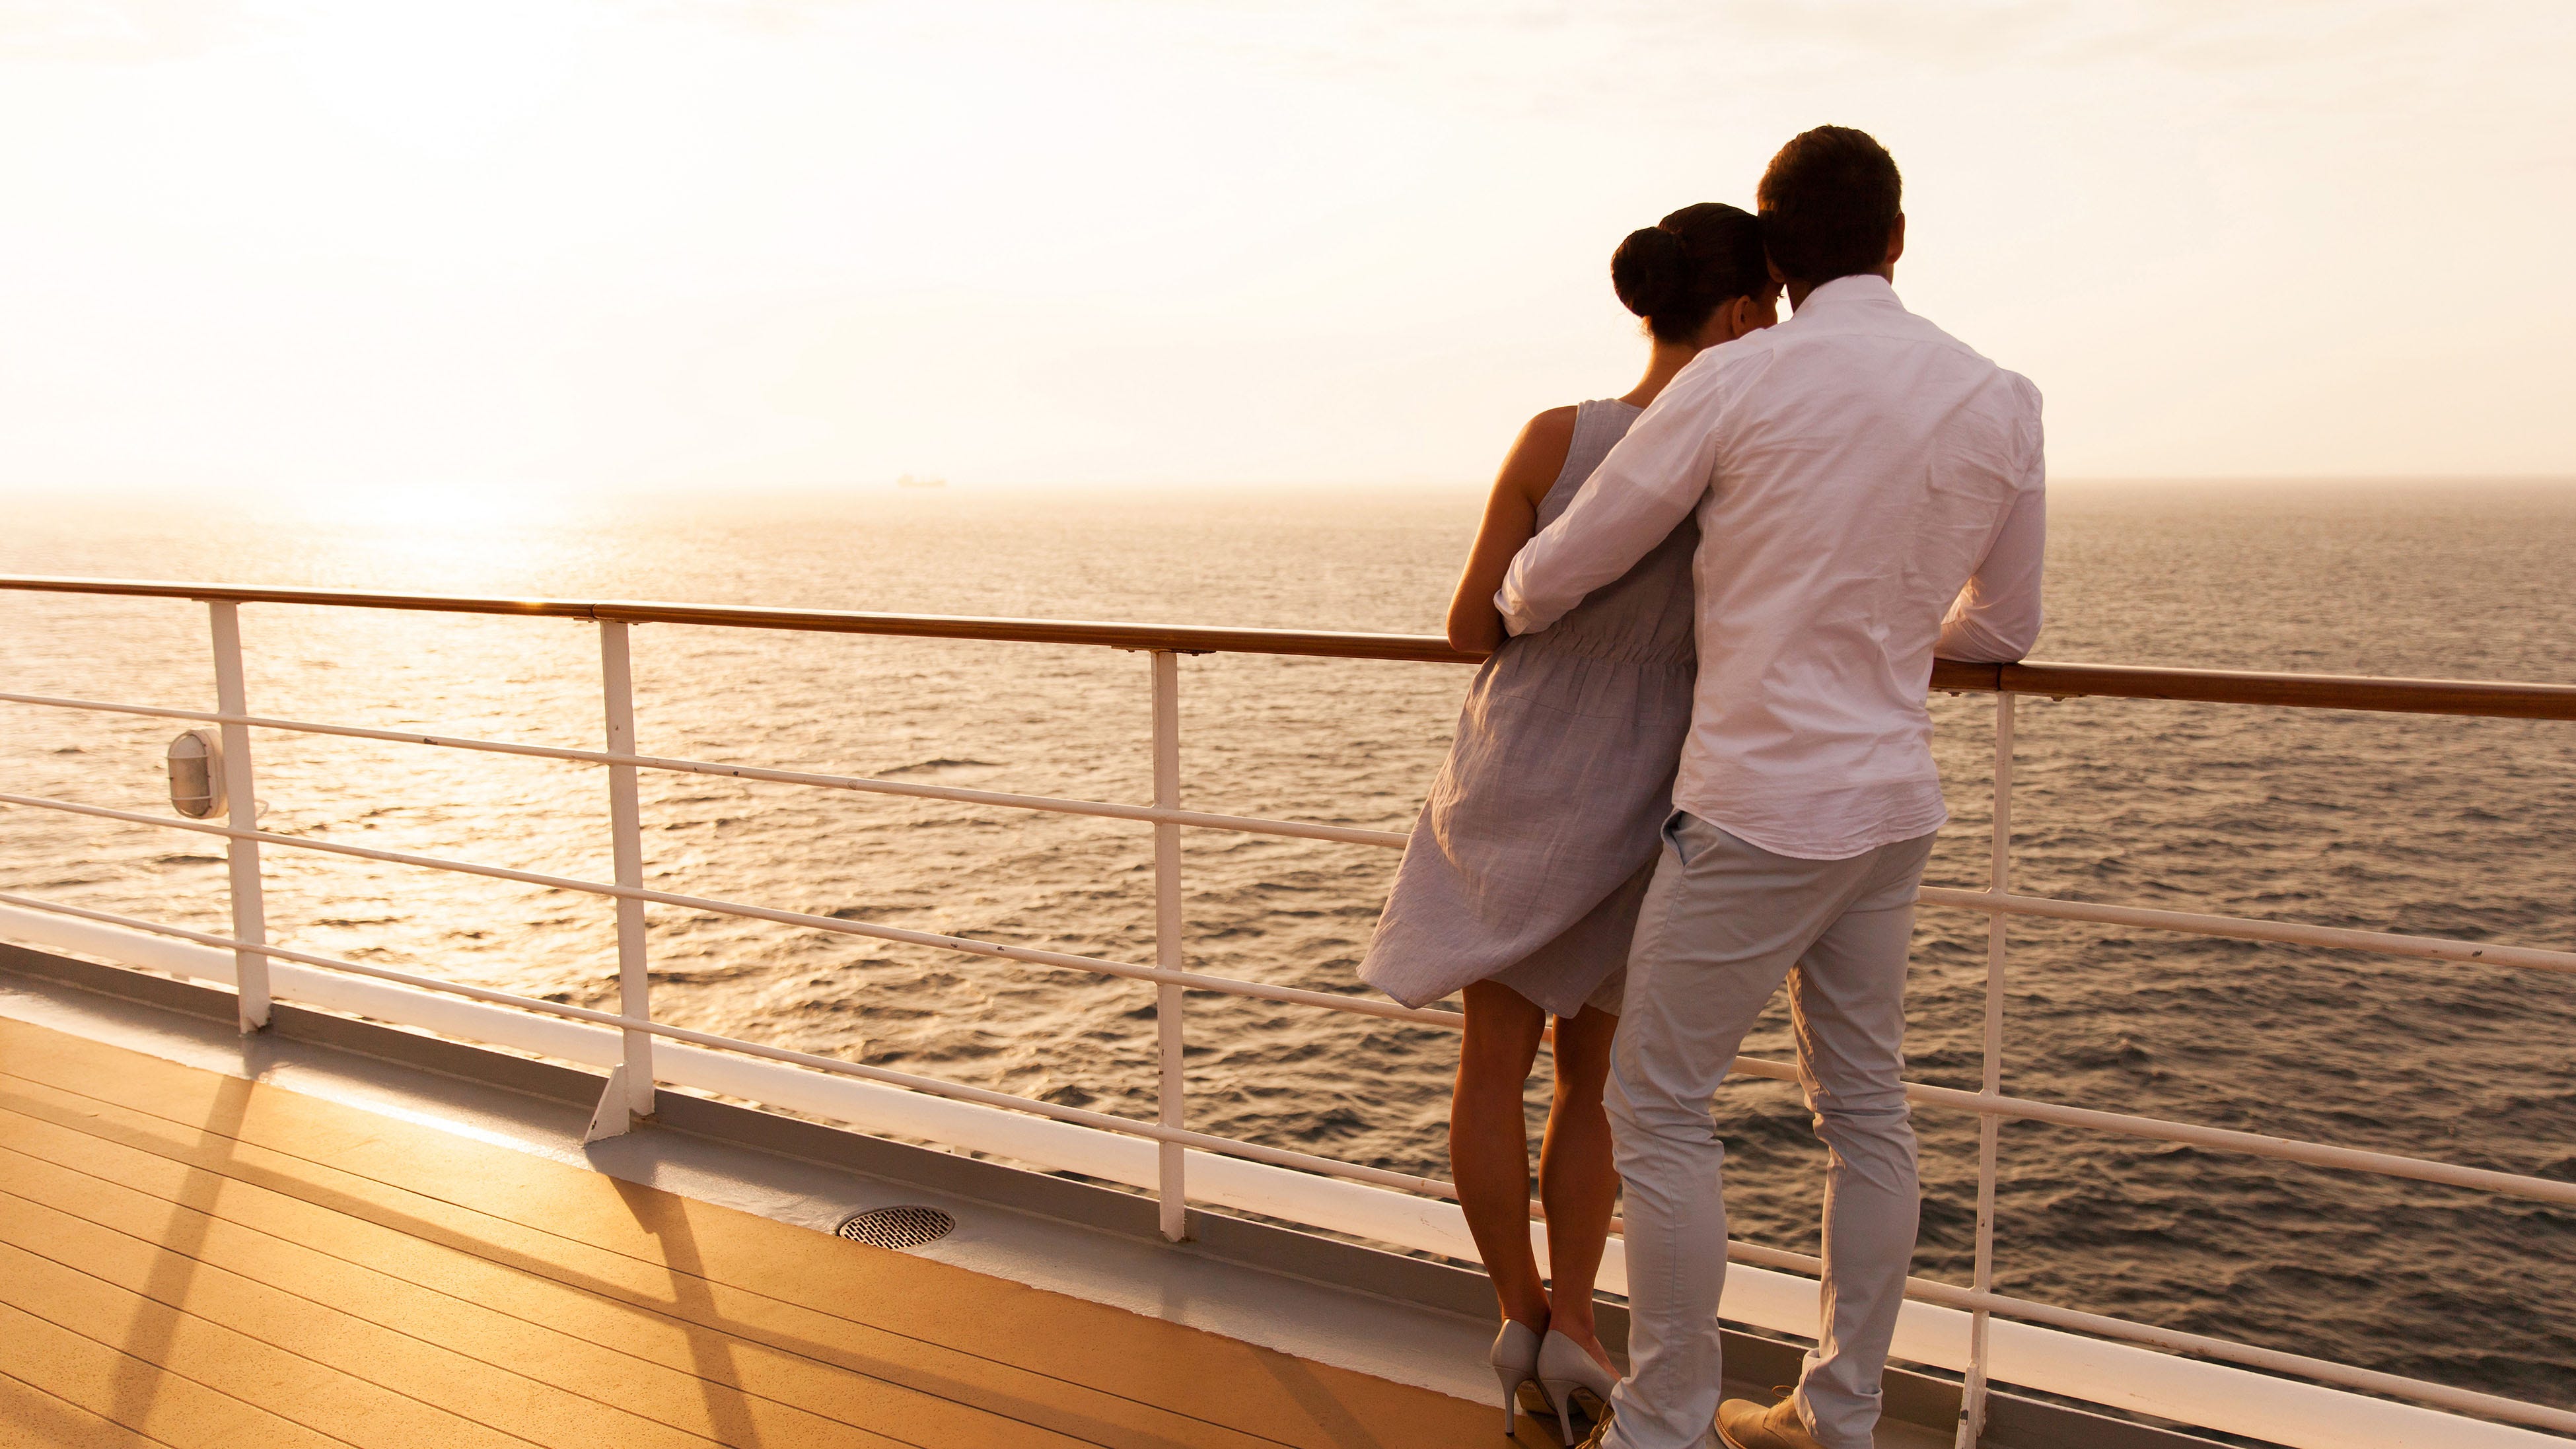 The Real Love Boat What its like to find love on a cruise ship